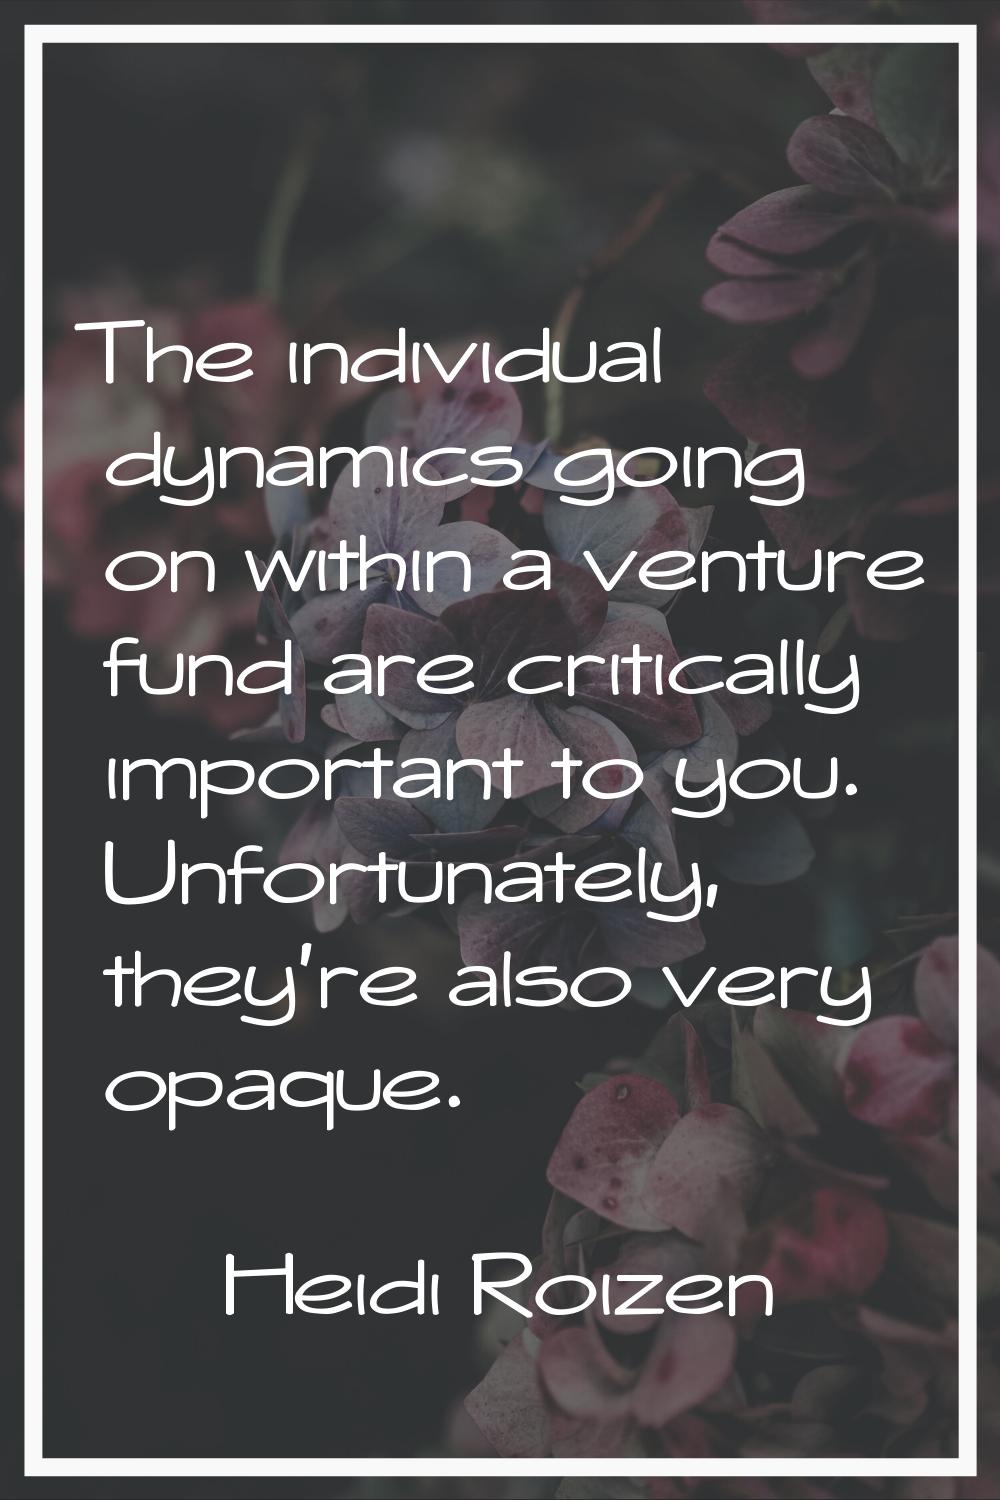 The individual dynamics going on within a venture fund are critically important to you. Unfortunate